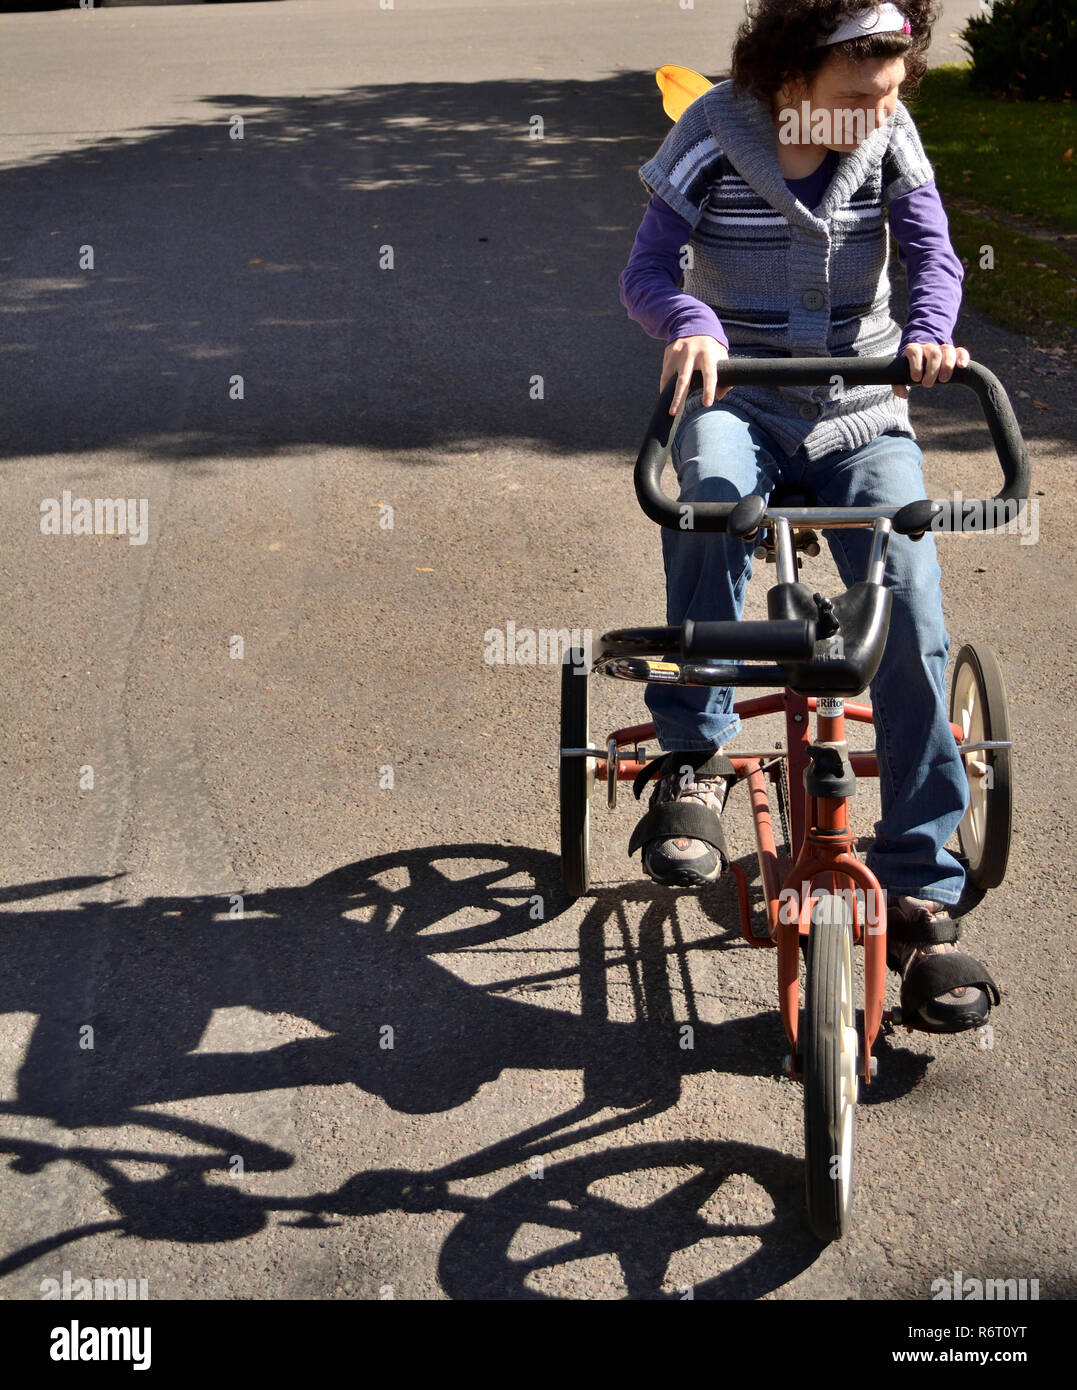 An example of community inclusion, a young woman with special needs rides an adaptive bike in her bike-friendly Colorado community. Stock Photo